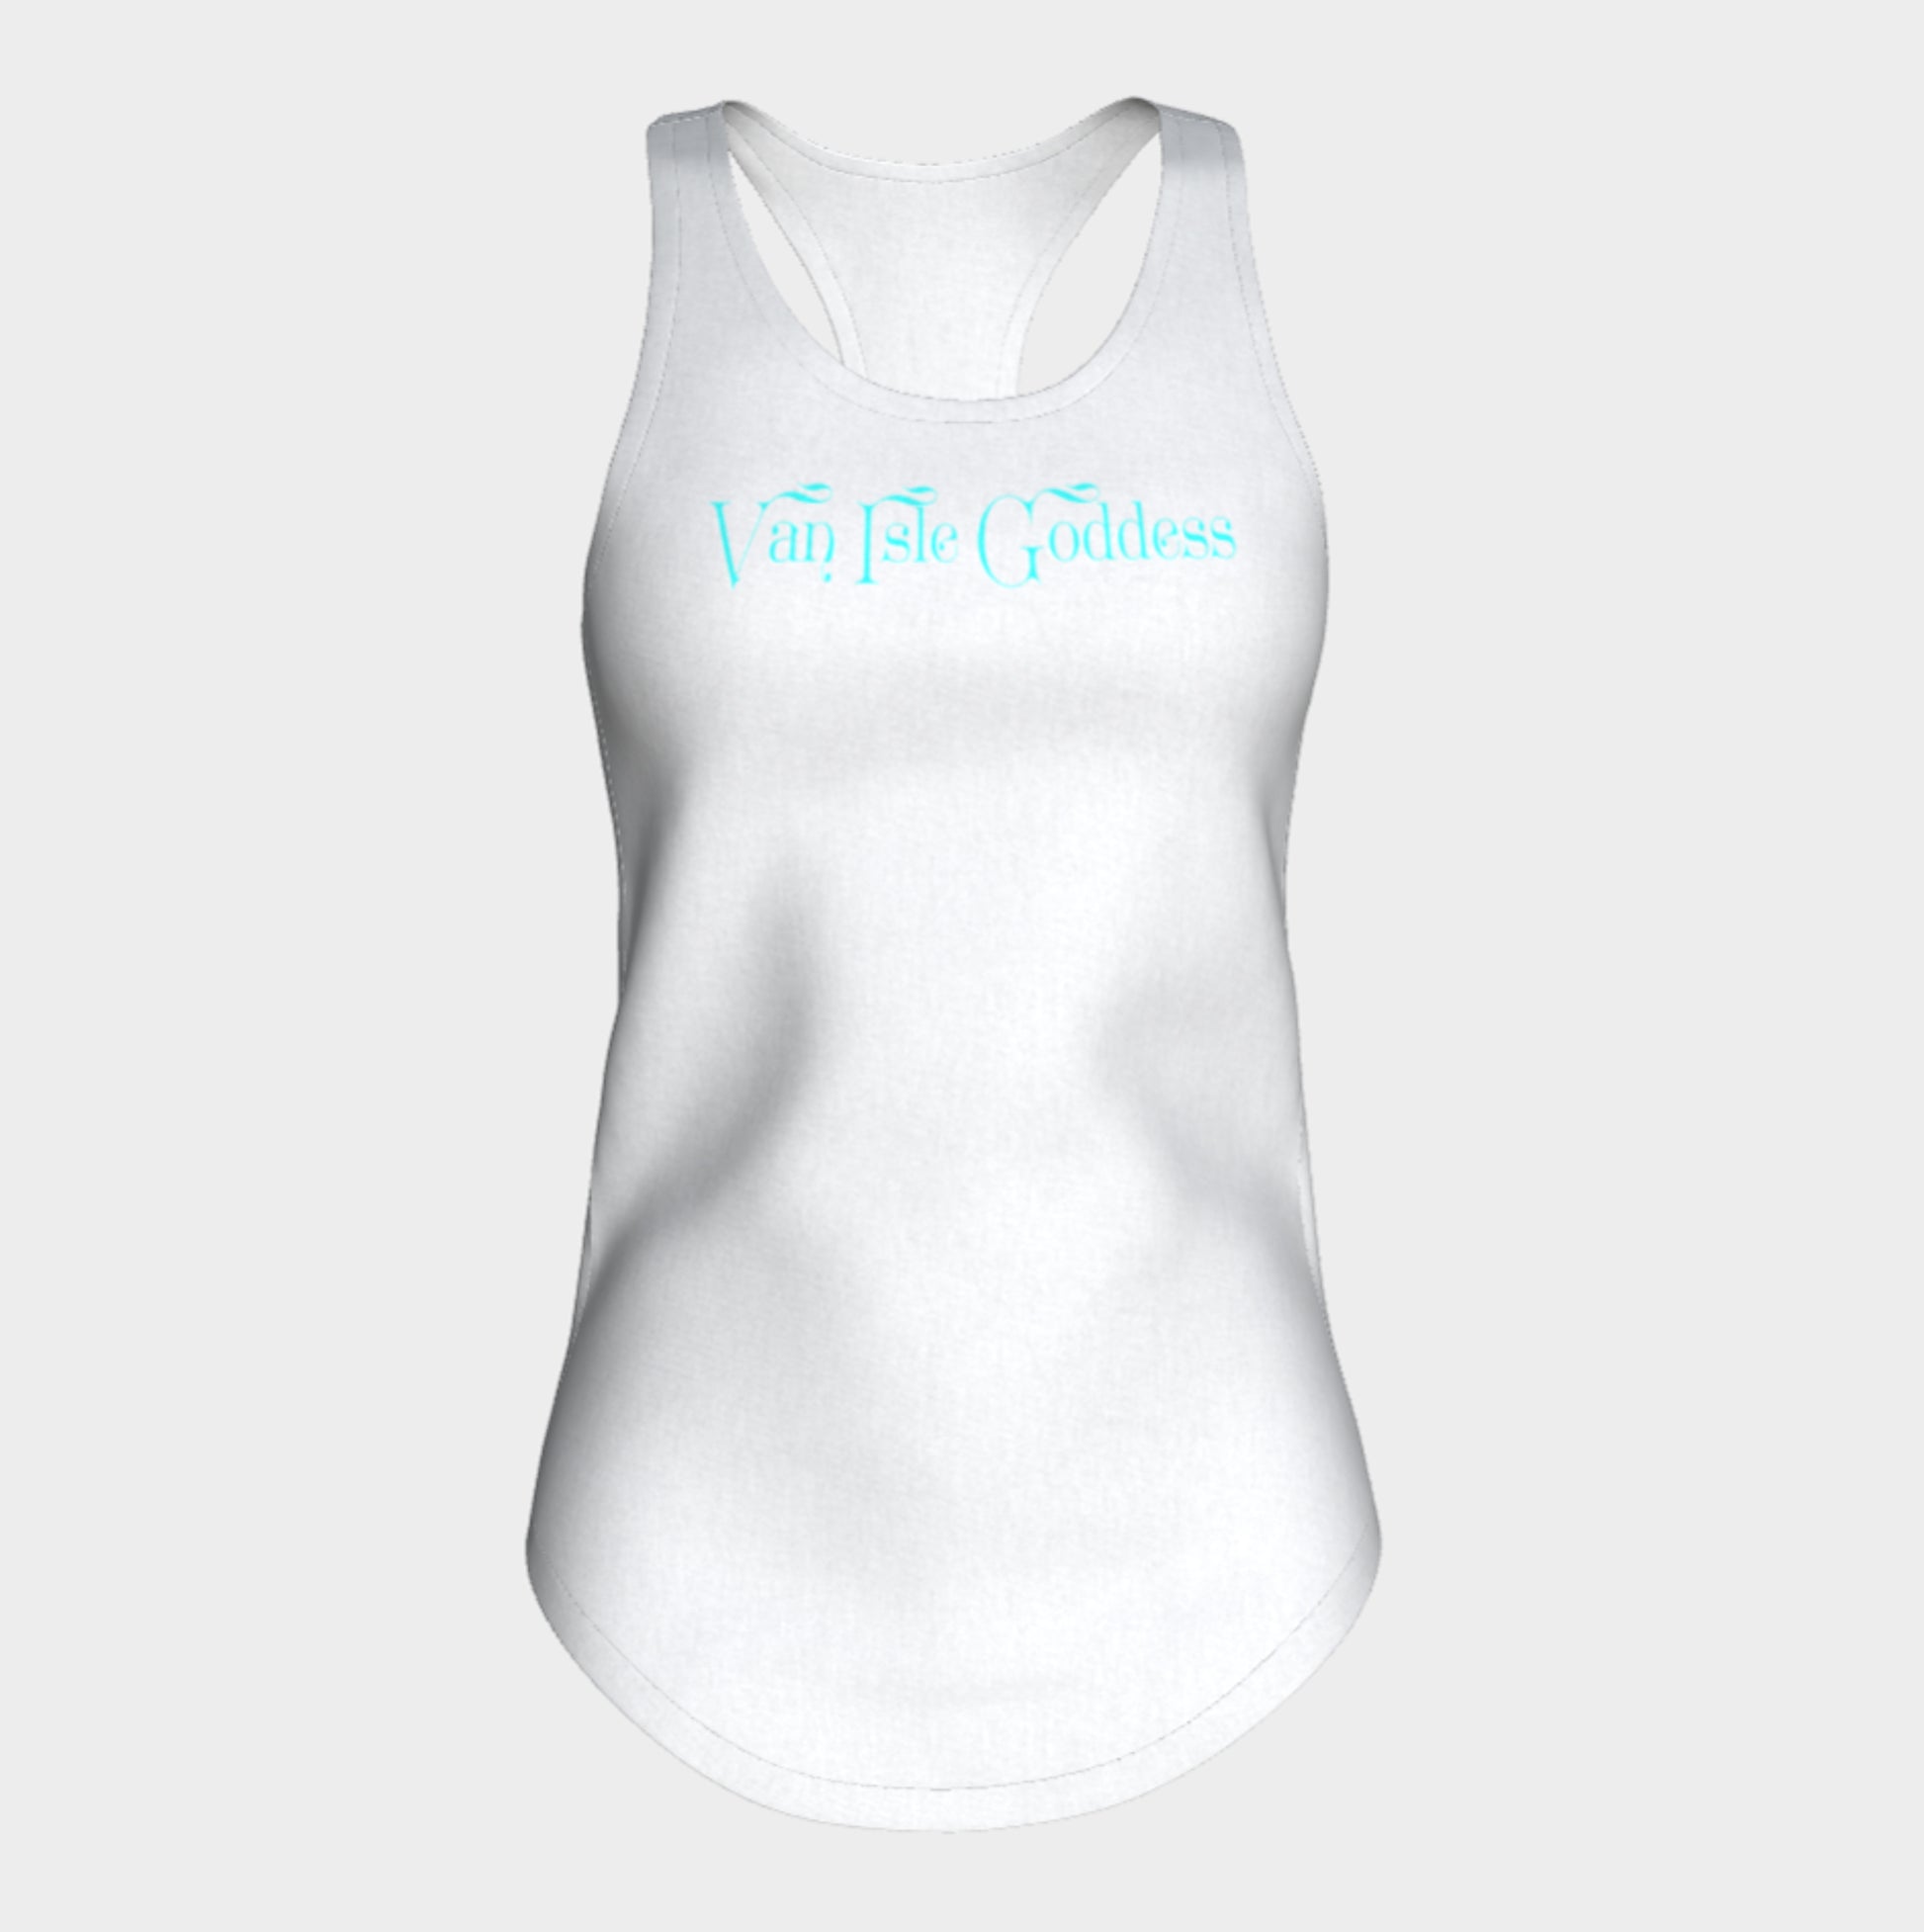 Van Isle Goddess Racerback Tank Top  Excellent choice for the summer or for working out.   Made from 60% spun cotton and 40% poly for a mix of comfort and performance, you get it all (including my photography and digital art) with this custom printed racerback tank top. 